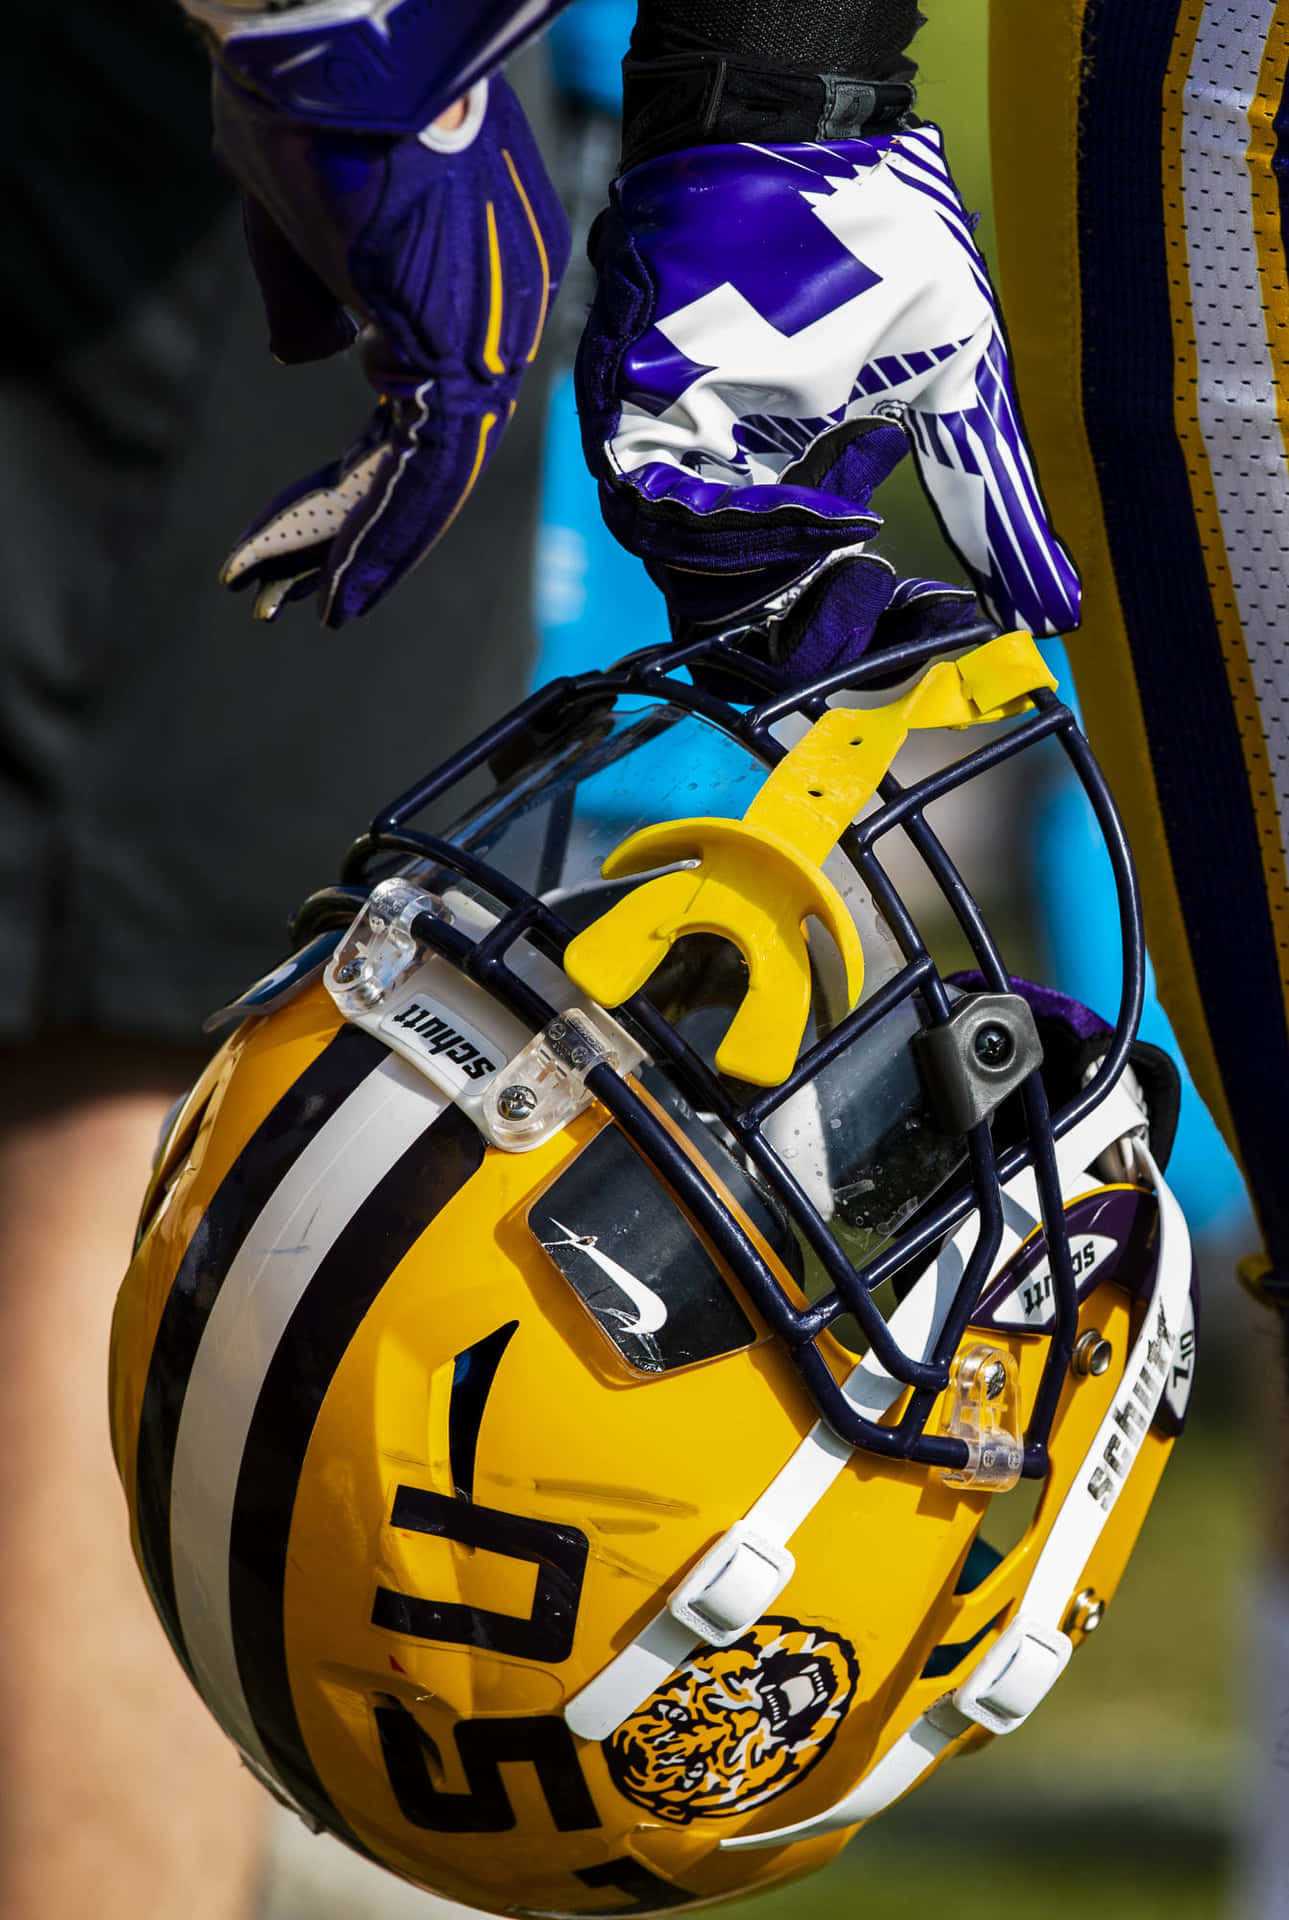 Show your loyalty and support by using an LSU themed iPhone background Wallpaper